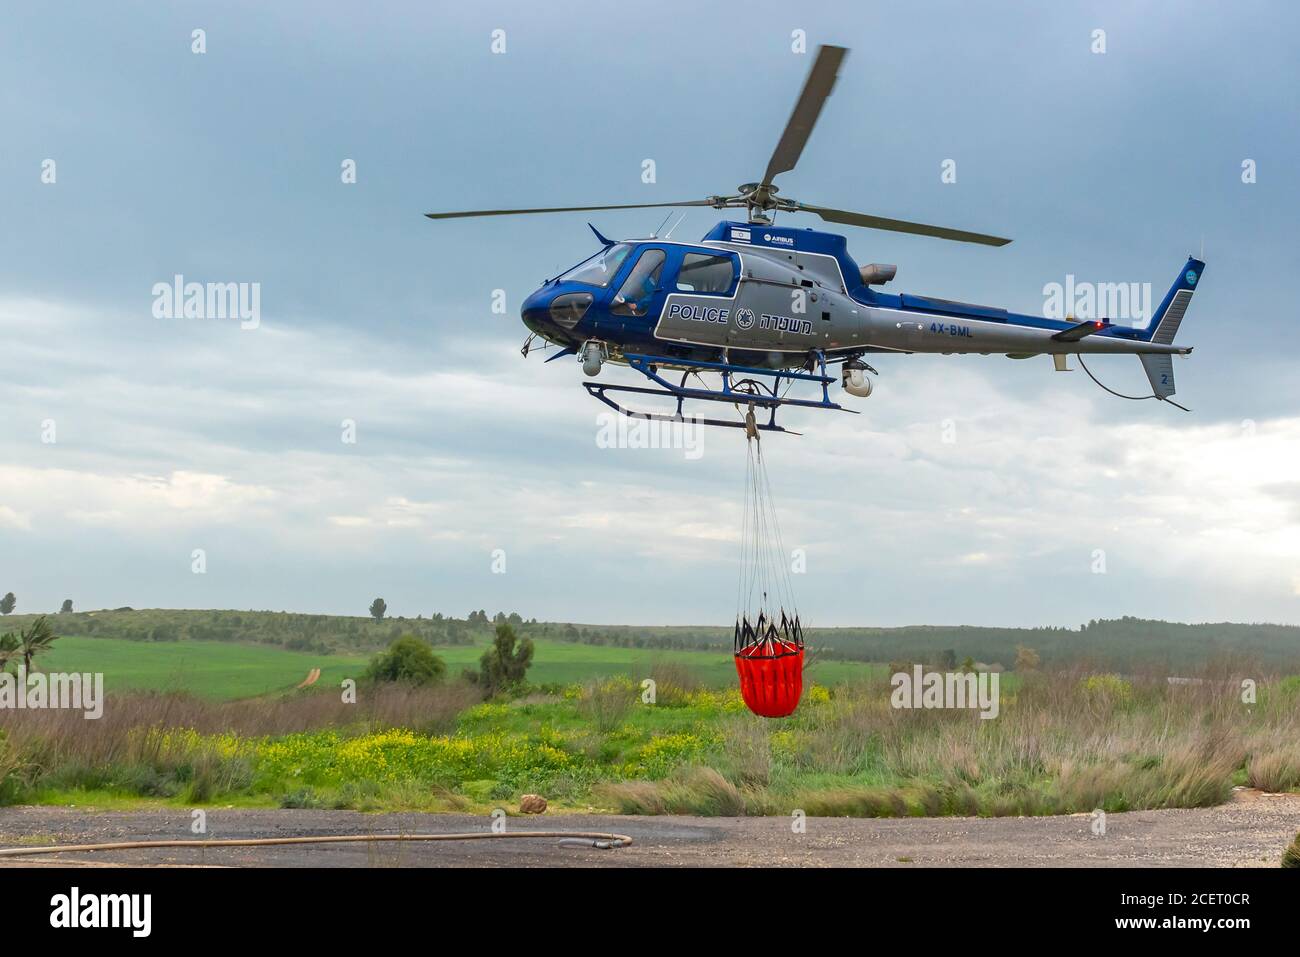 A police helicopter is used during a fire drill to airlift water to the fire zone Stock Photo